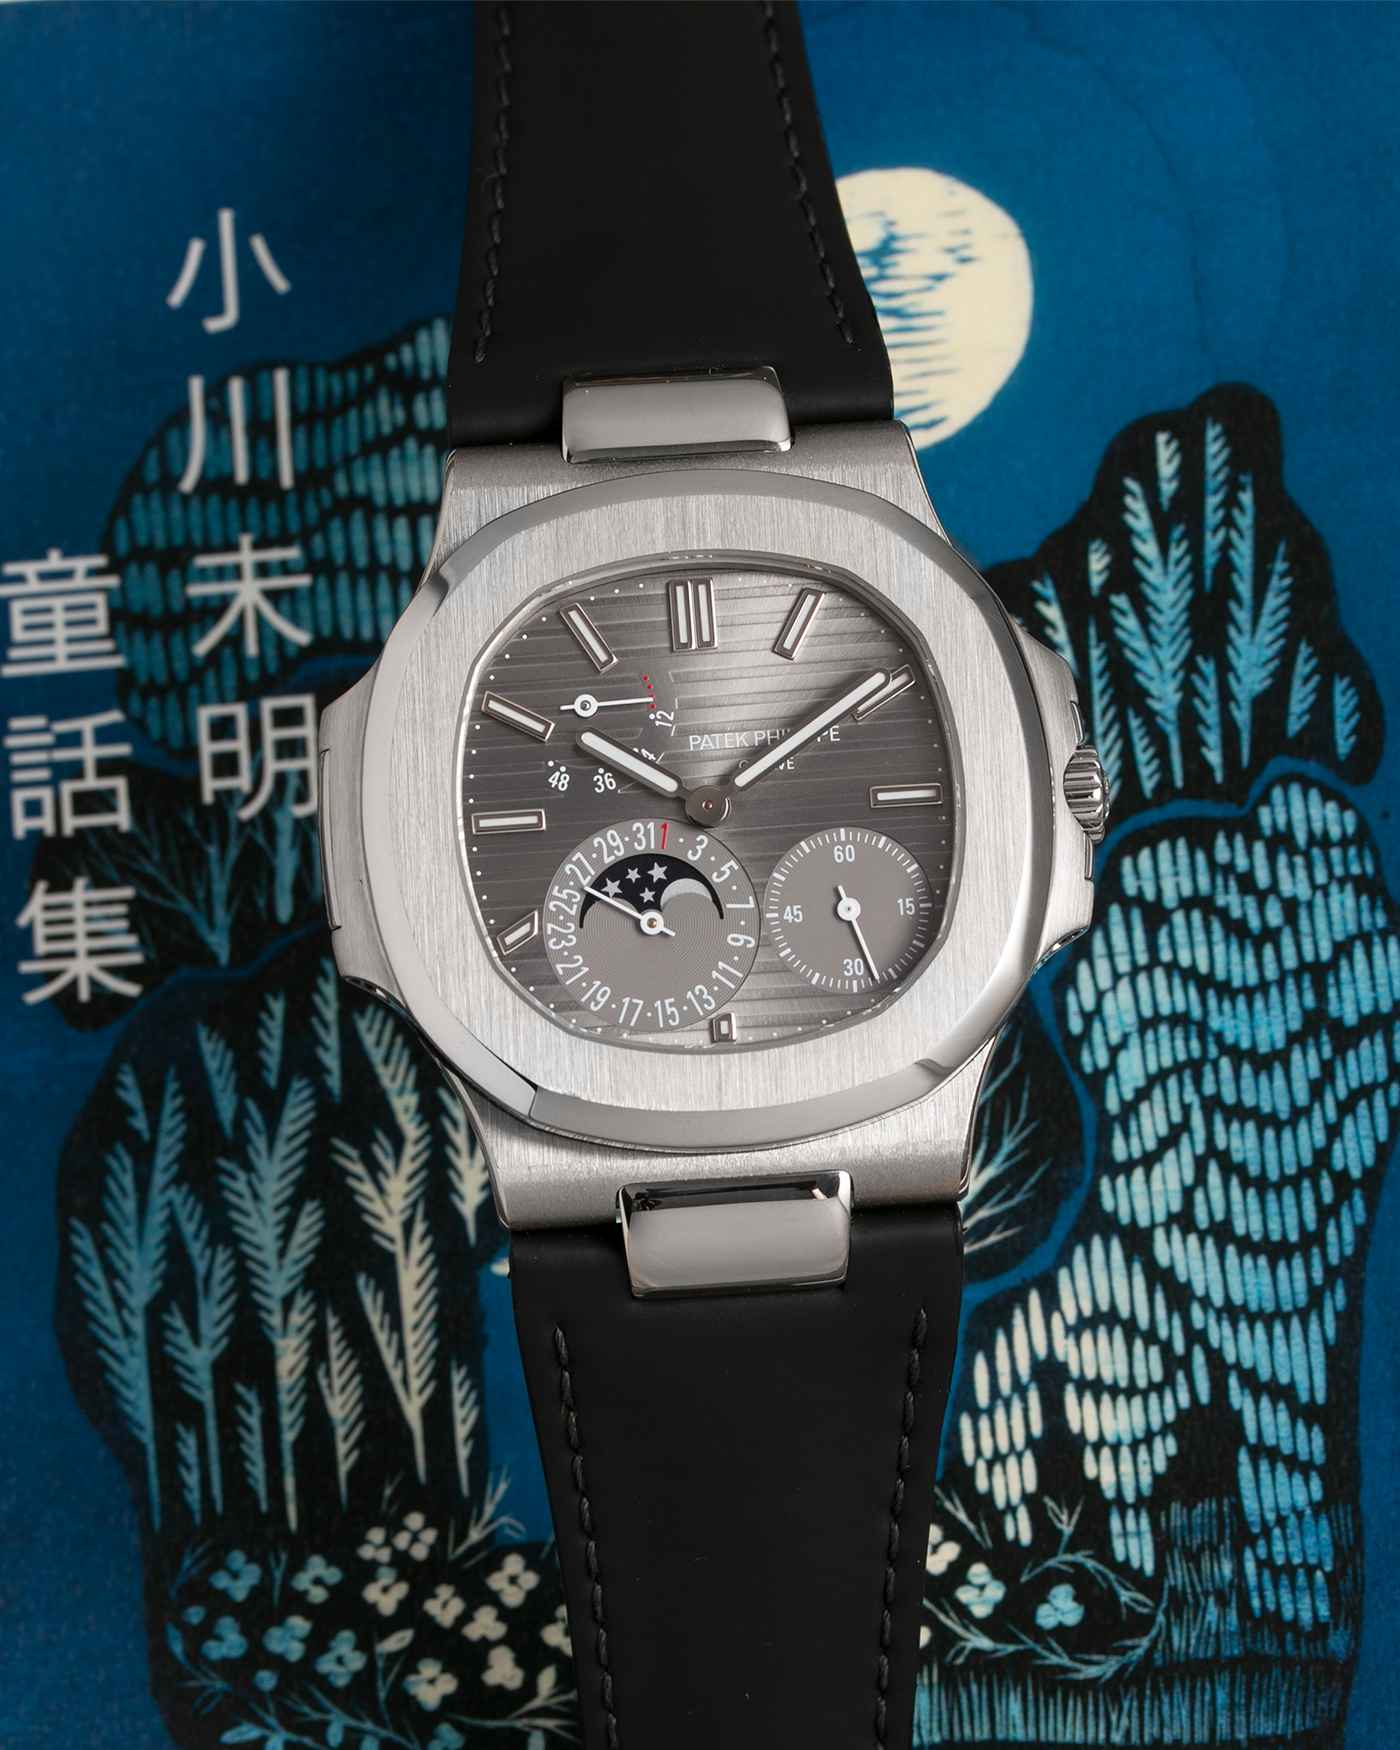 Brand: Patek Philippe Year: 2013 Model: Nautilus Reference Number: 5712G Material:18k White Gold Movement: Cal. 240 PS IRM C LU Case Diameter: 40mm Bracelet: Patek Philippe Grey Leather Strap with 18k White Gold Nautilus Deployant